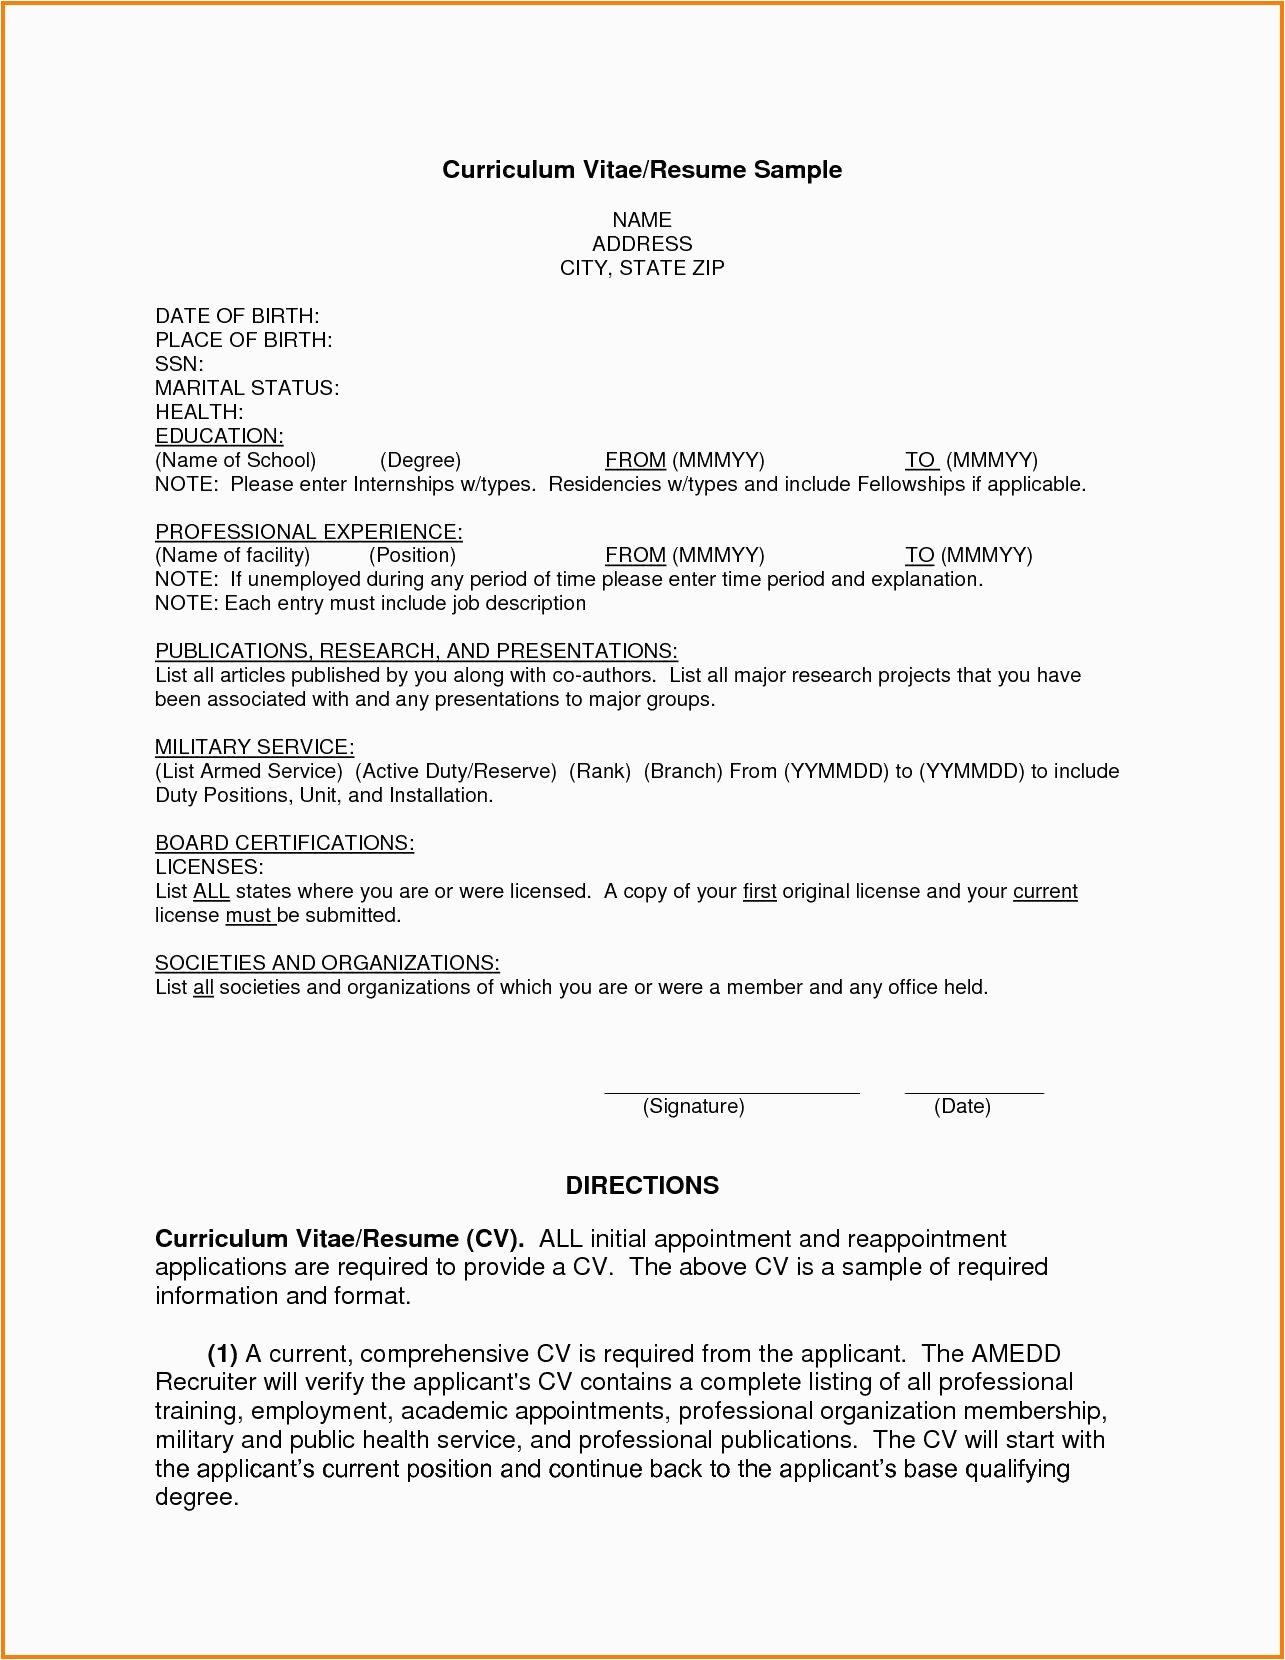 Resume Samples for Part Time Jobs In Canada Resume Samples for Jobs In Canada Awesome Resume Examples